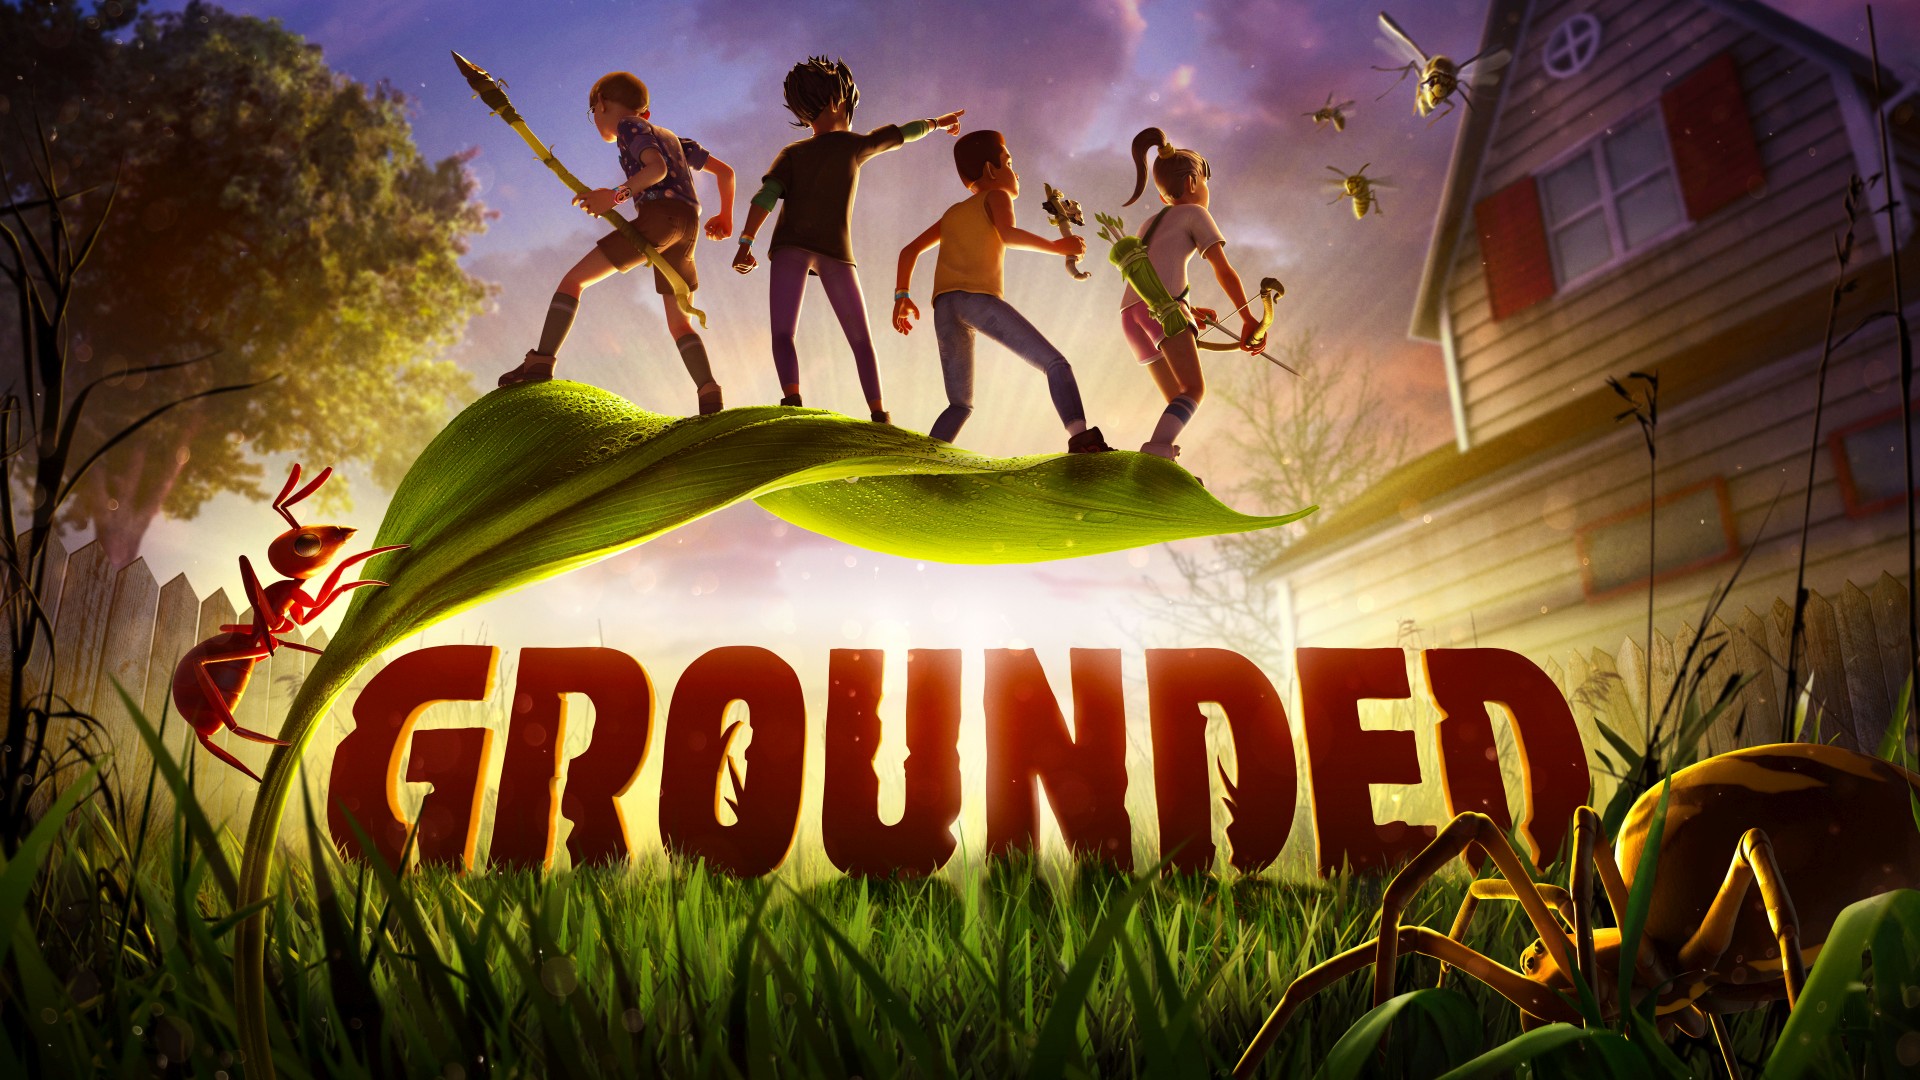 Video For Grounded Gets Its Full Release This September